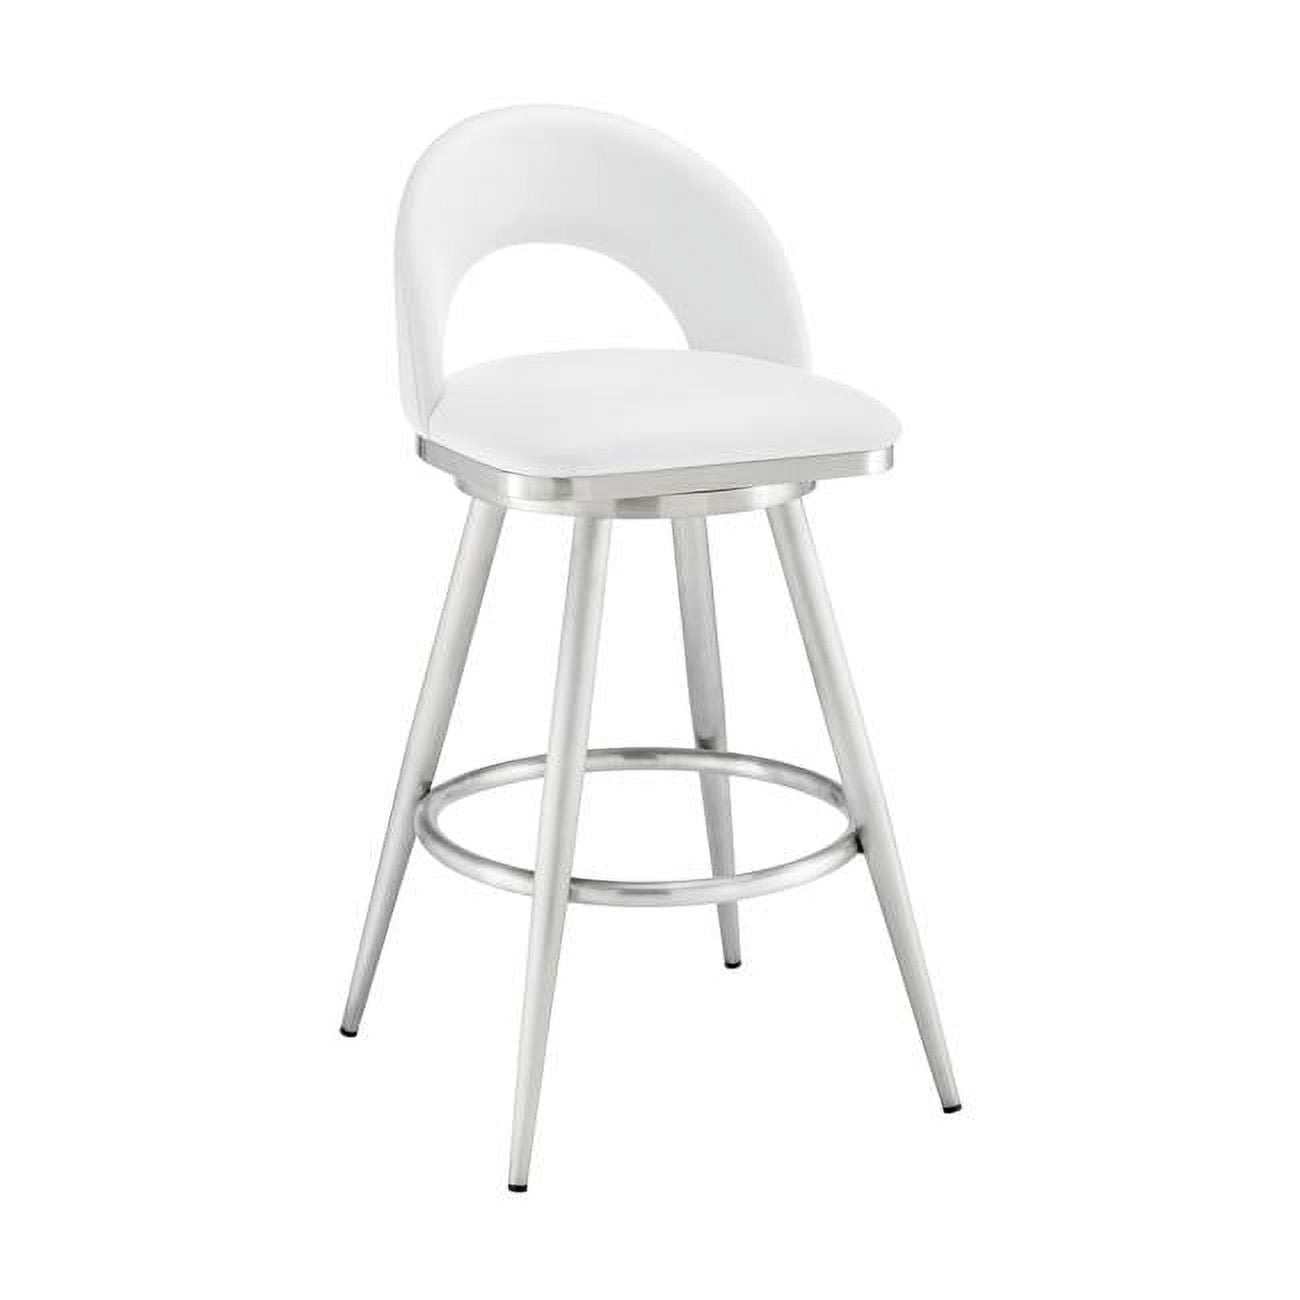 Picture of Armen Living 840254335370 34 x 17 x 20.5 in. Lottech Swivel Counter Stool in Brushed Stainless Steel with White Faux Leather